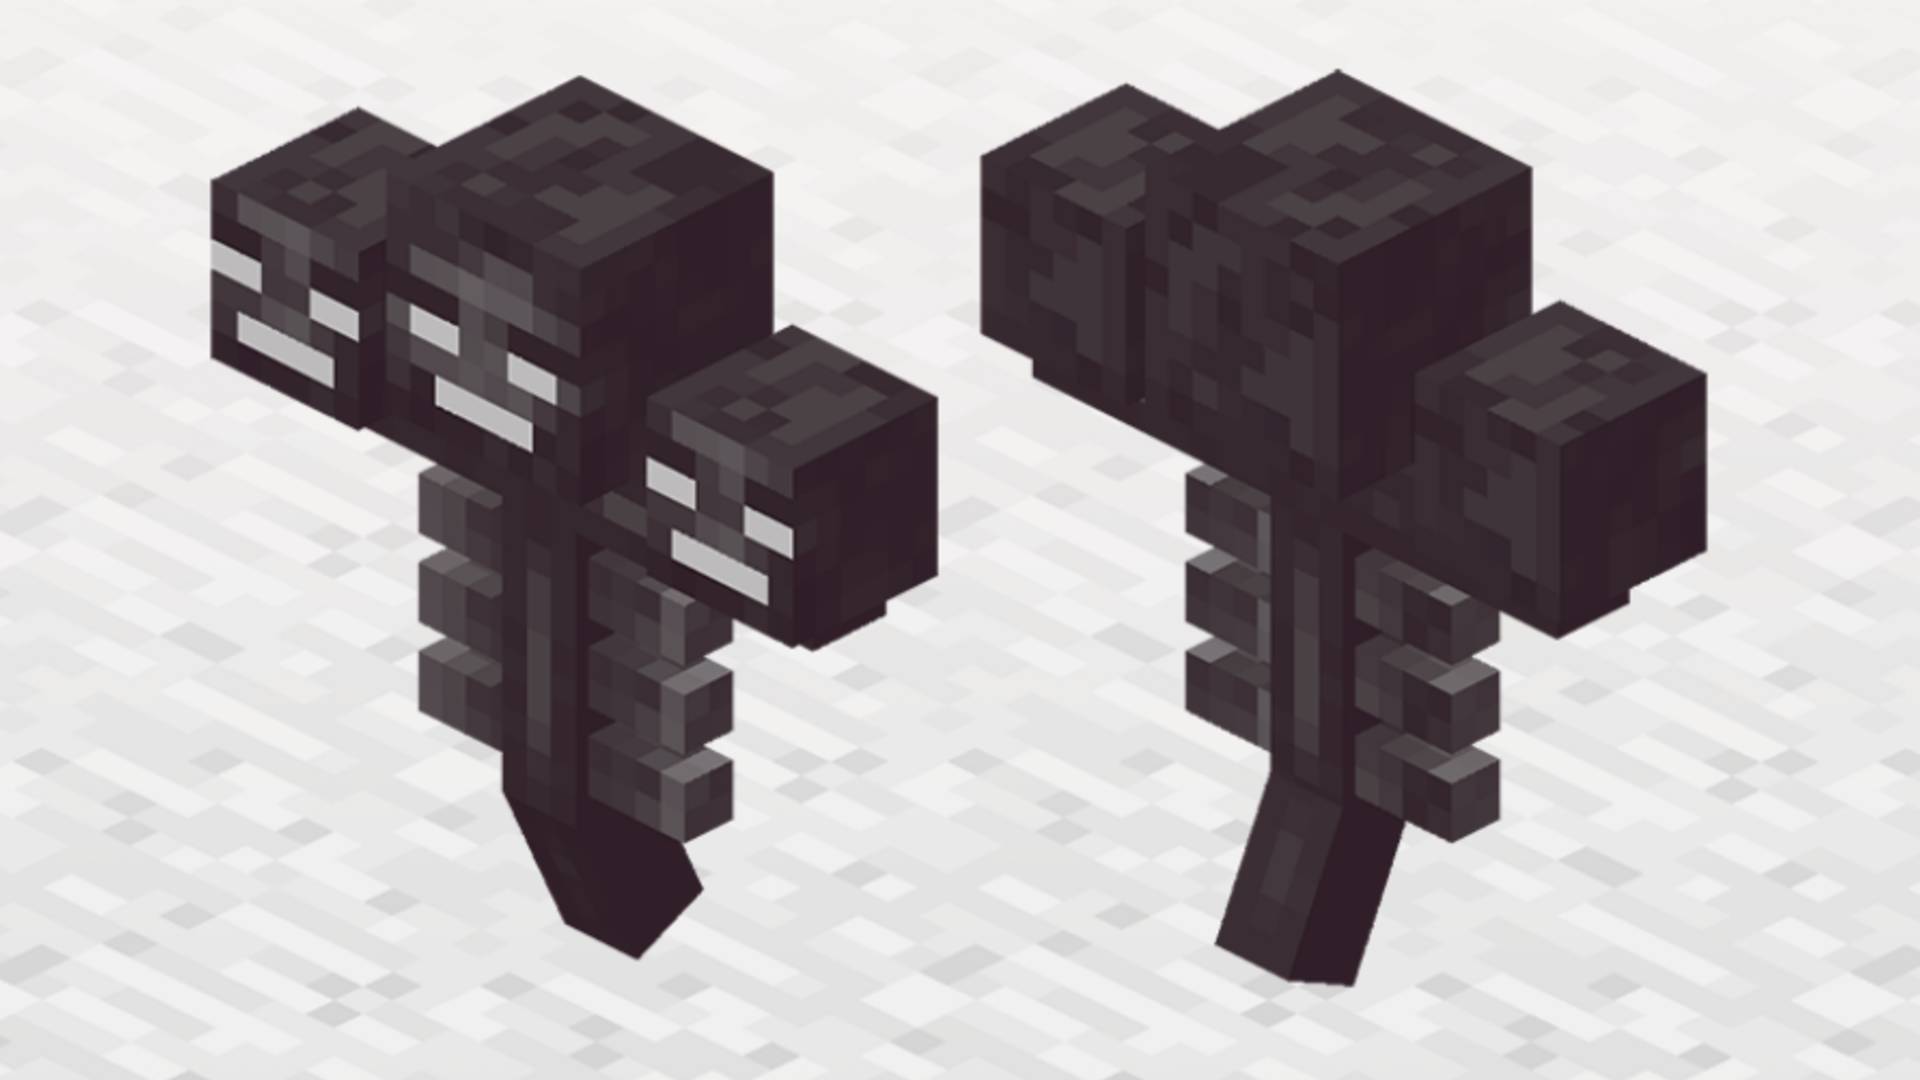 Minecraft wither: how to spawn and defeat the wither boss